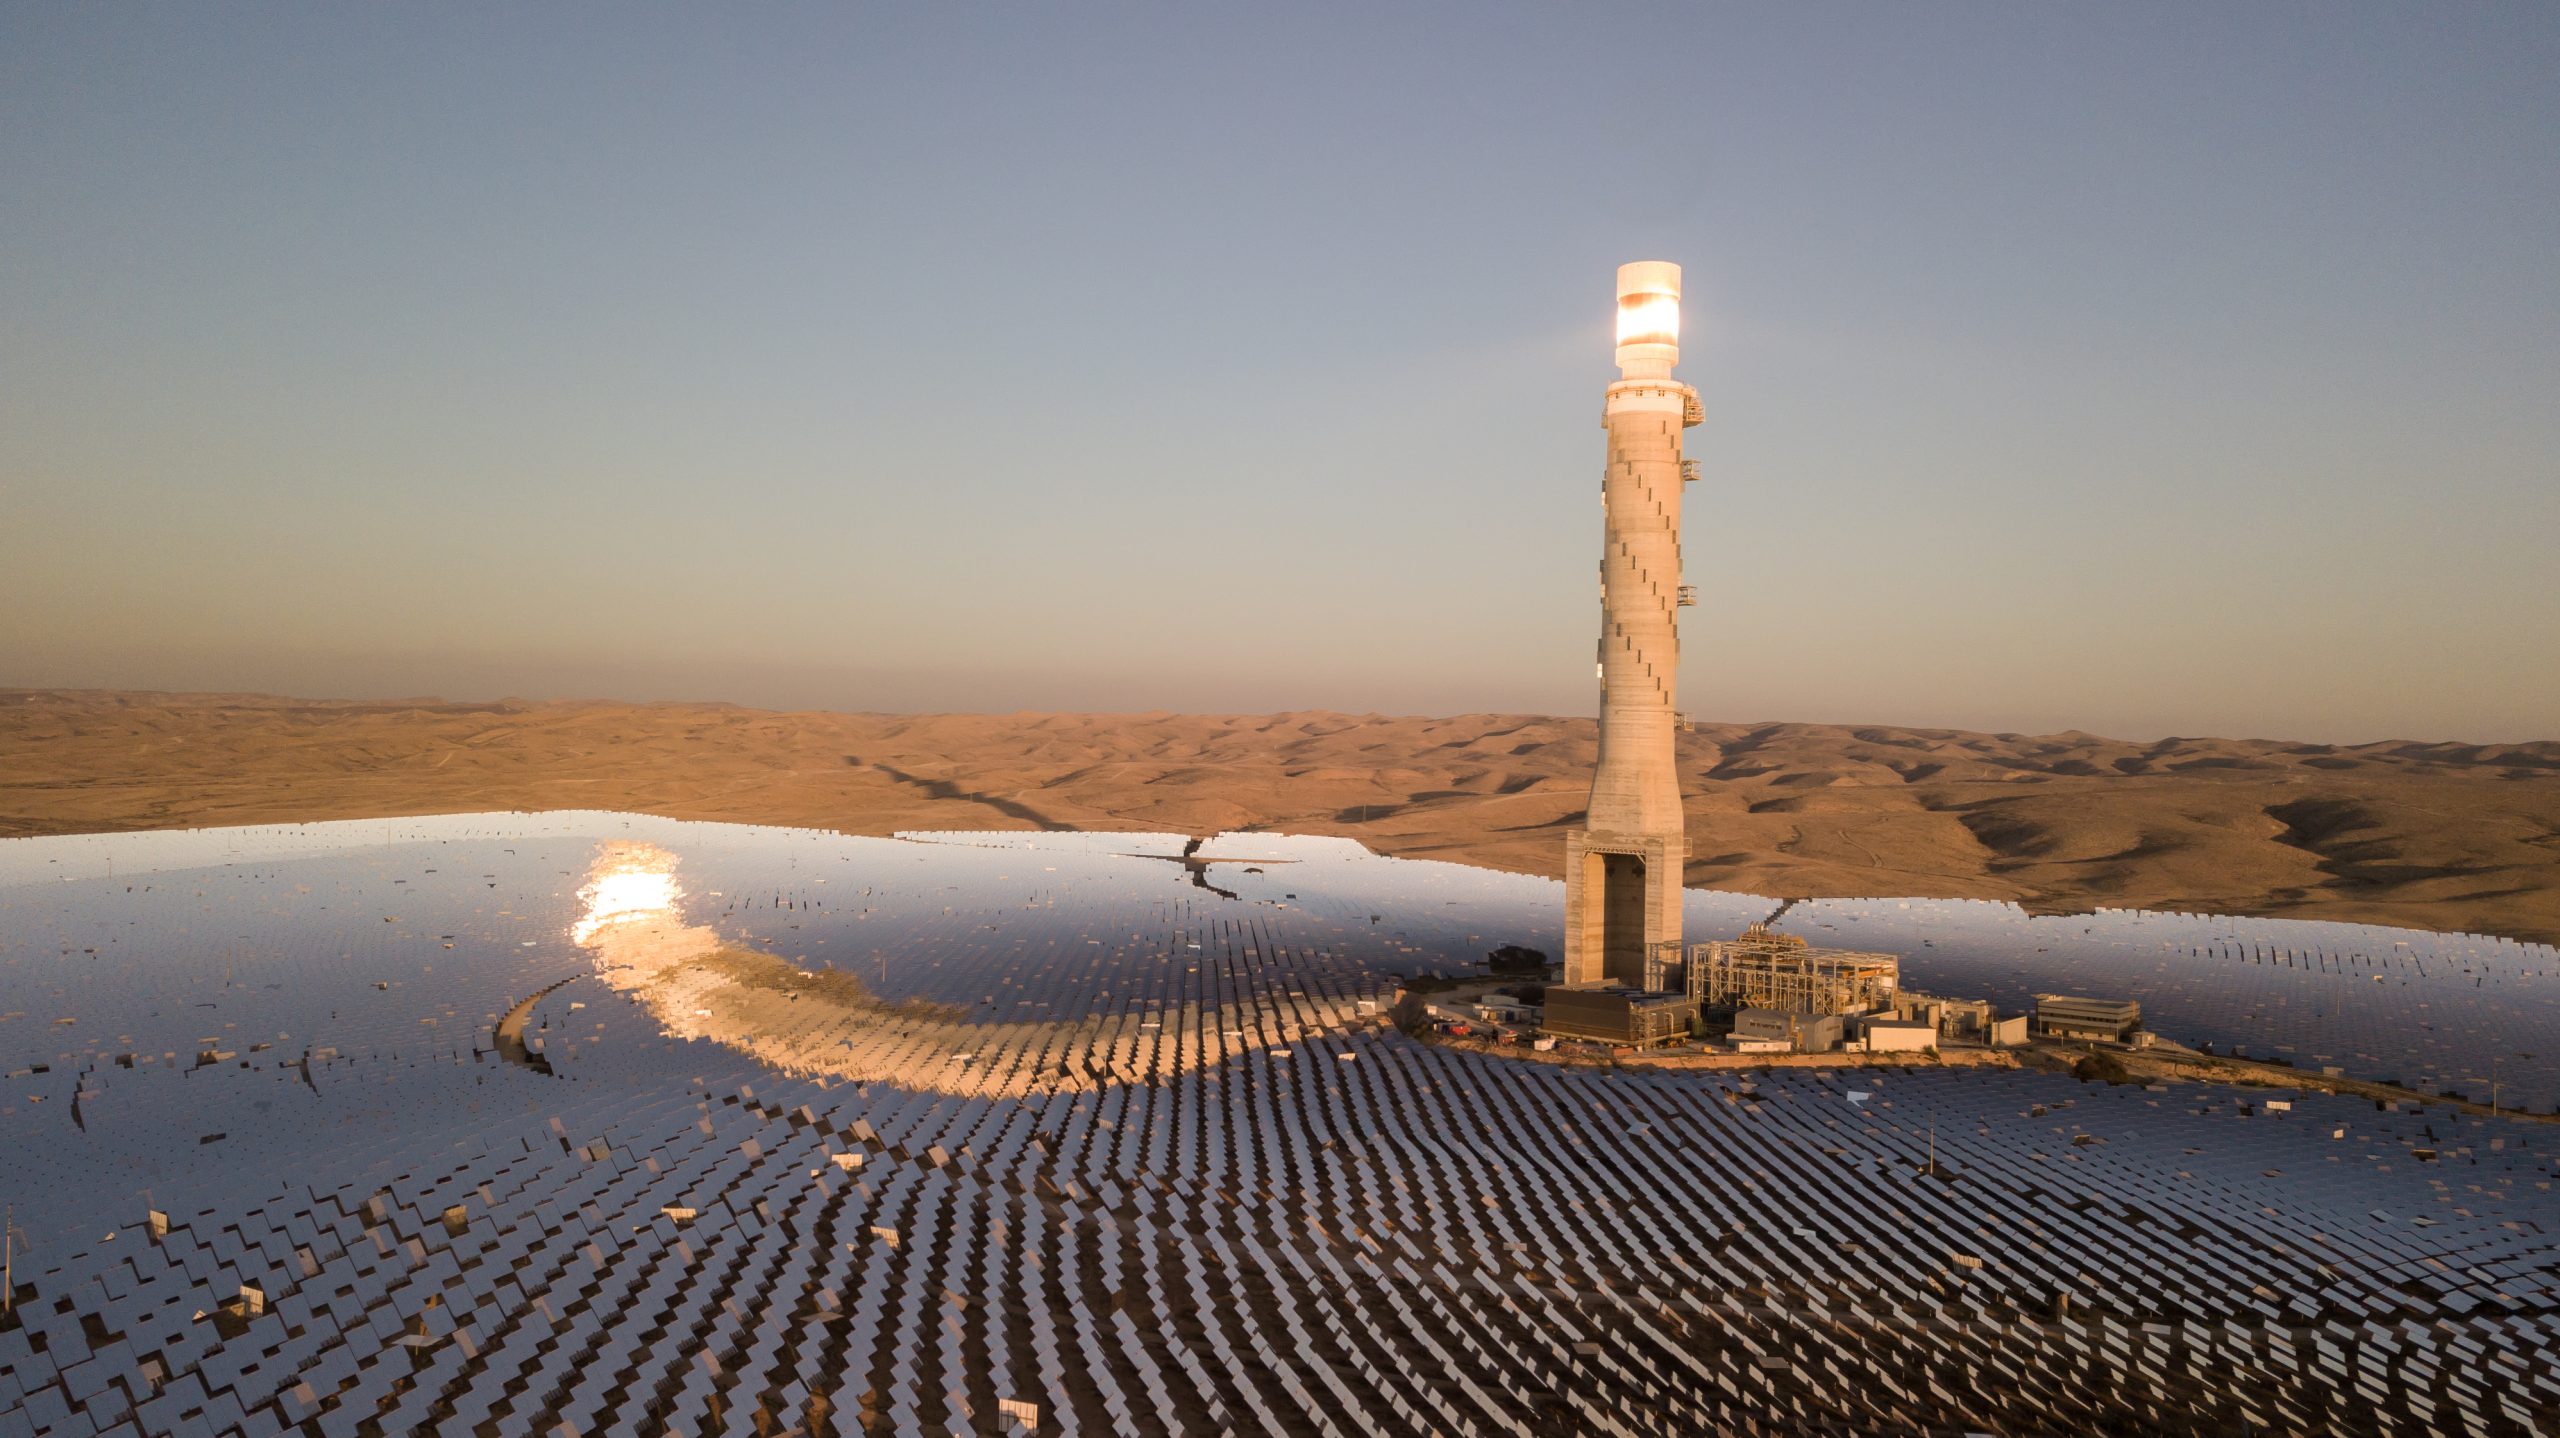 View of desert landscape with hundreds of solar panels surrounding a lighthouse-looking tower.